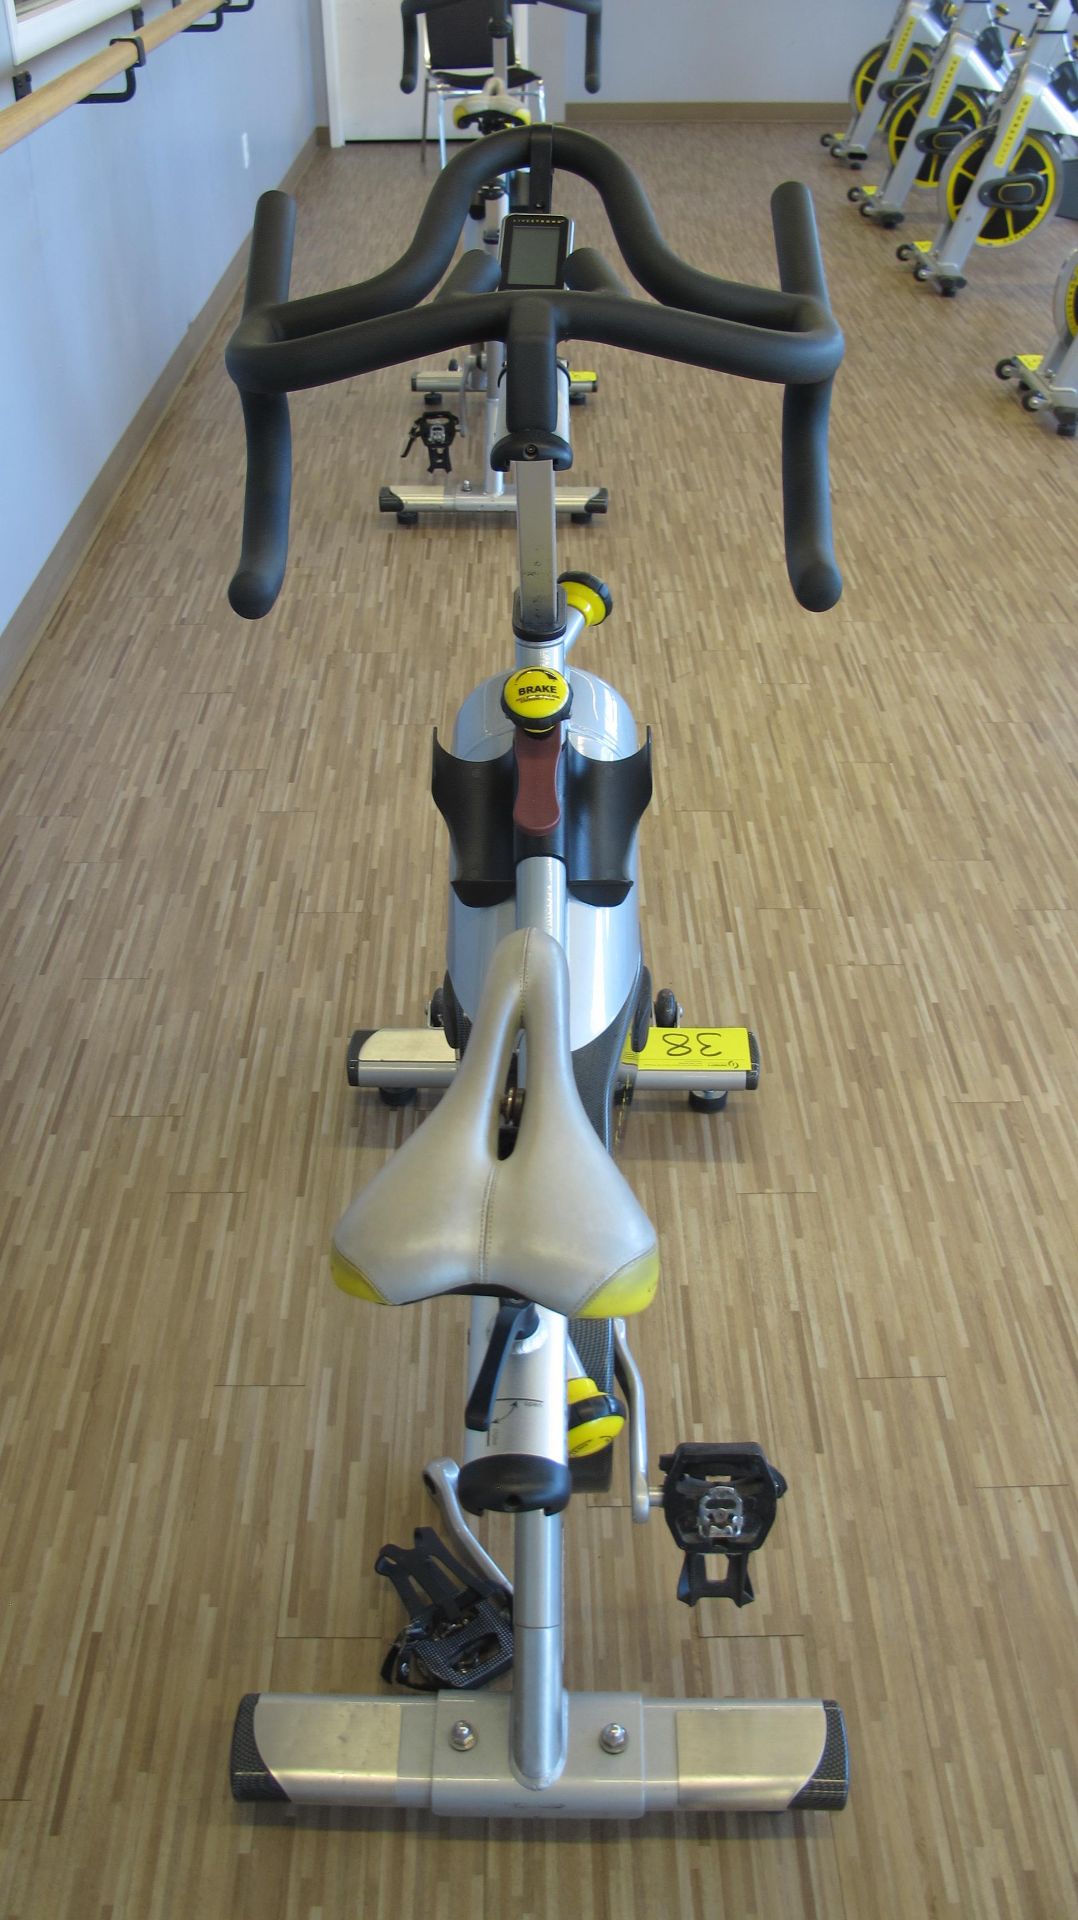 LIVESTRONG LS S-Series Class S Stationary Spin Bike, 'AS-IS', S/N: LASB0008034-111 - Image 7 of 10